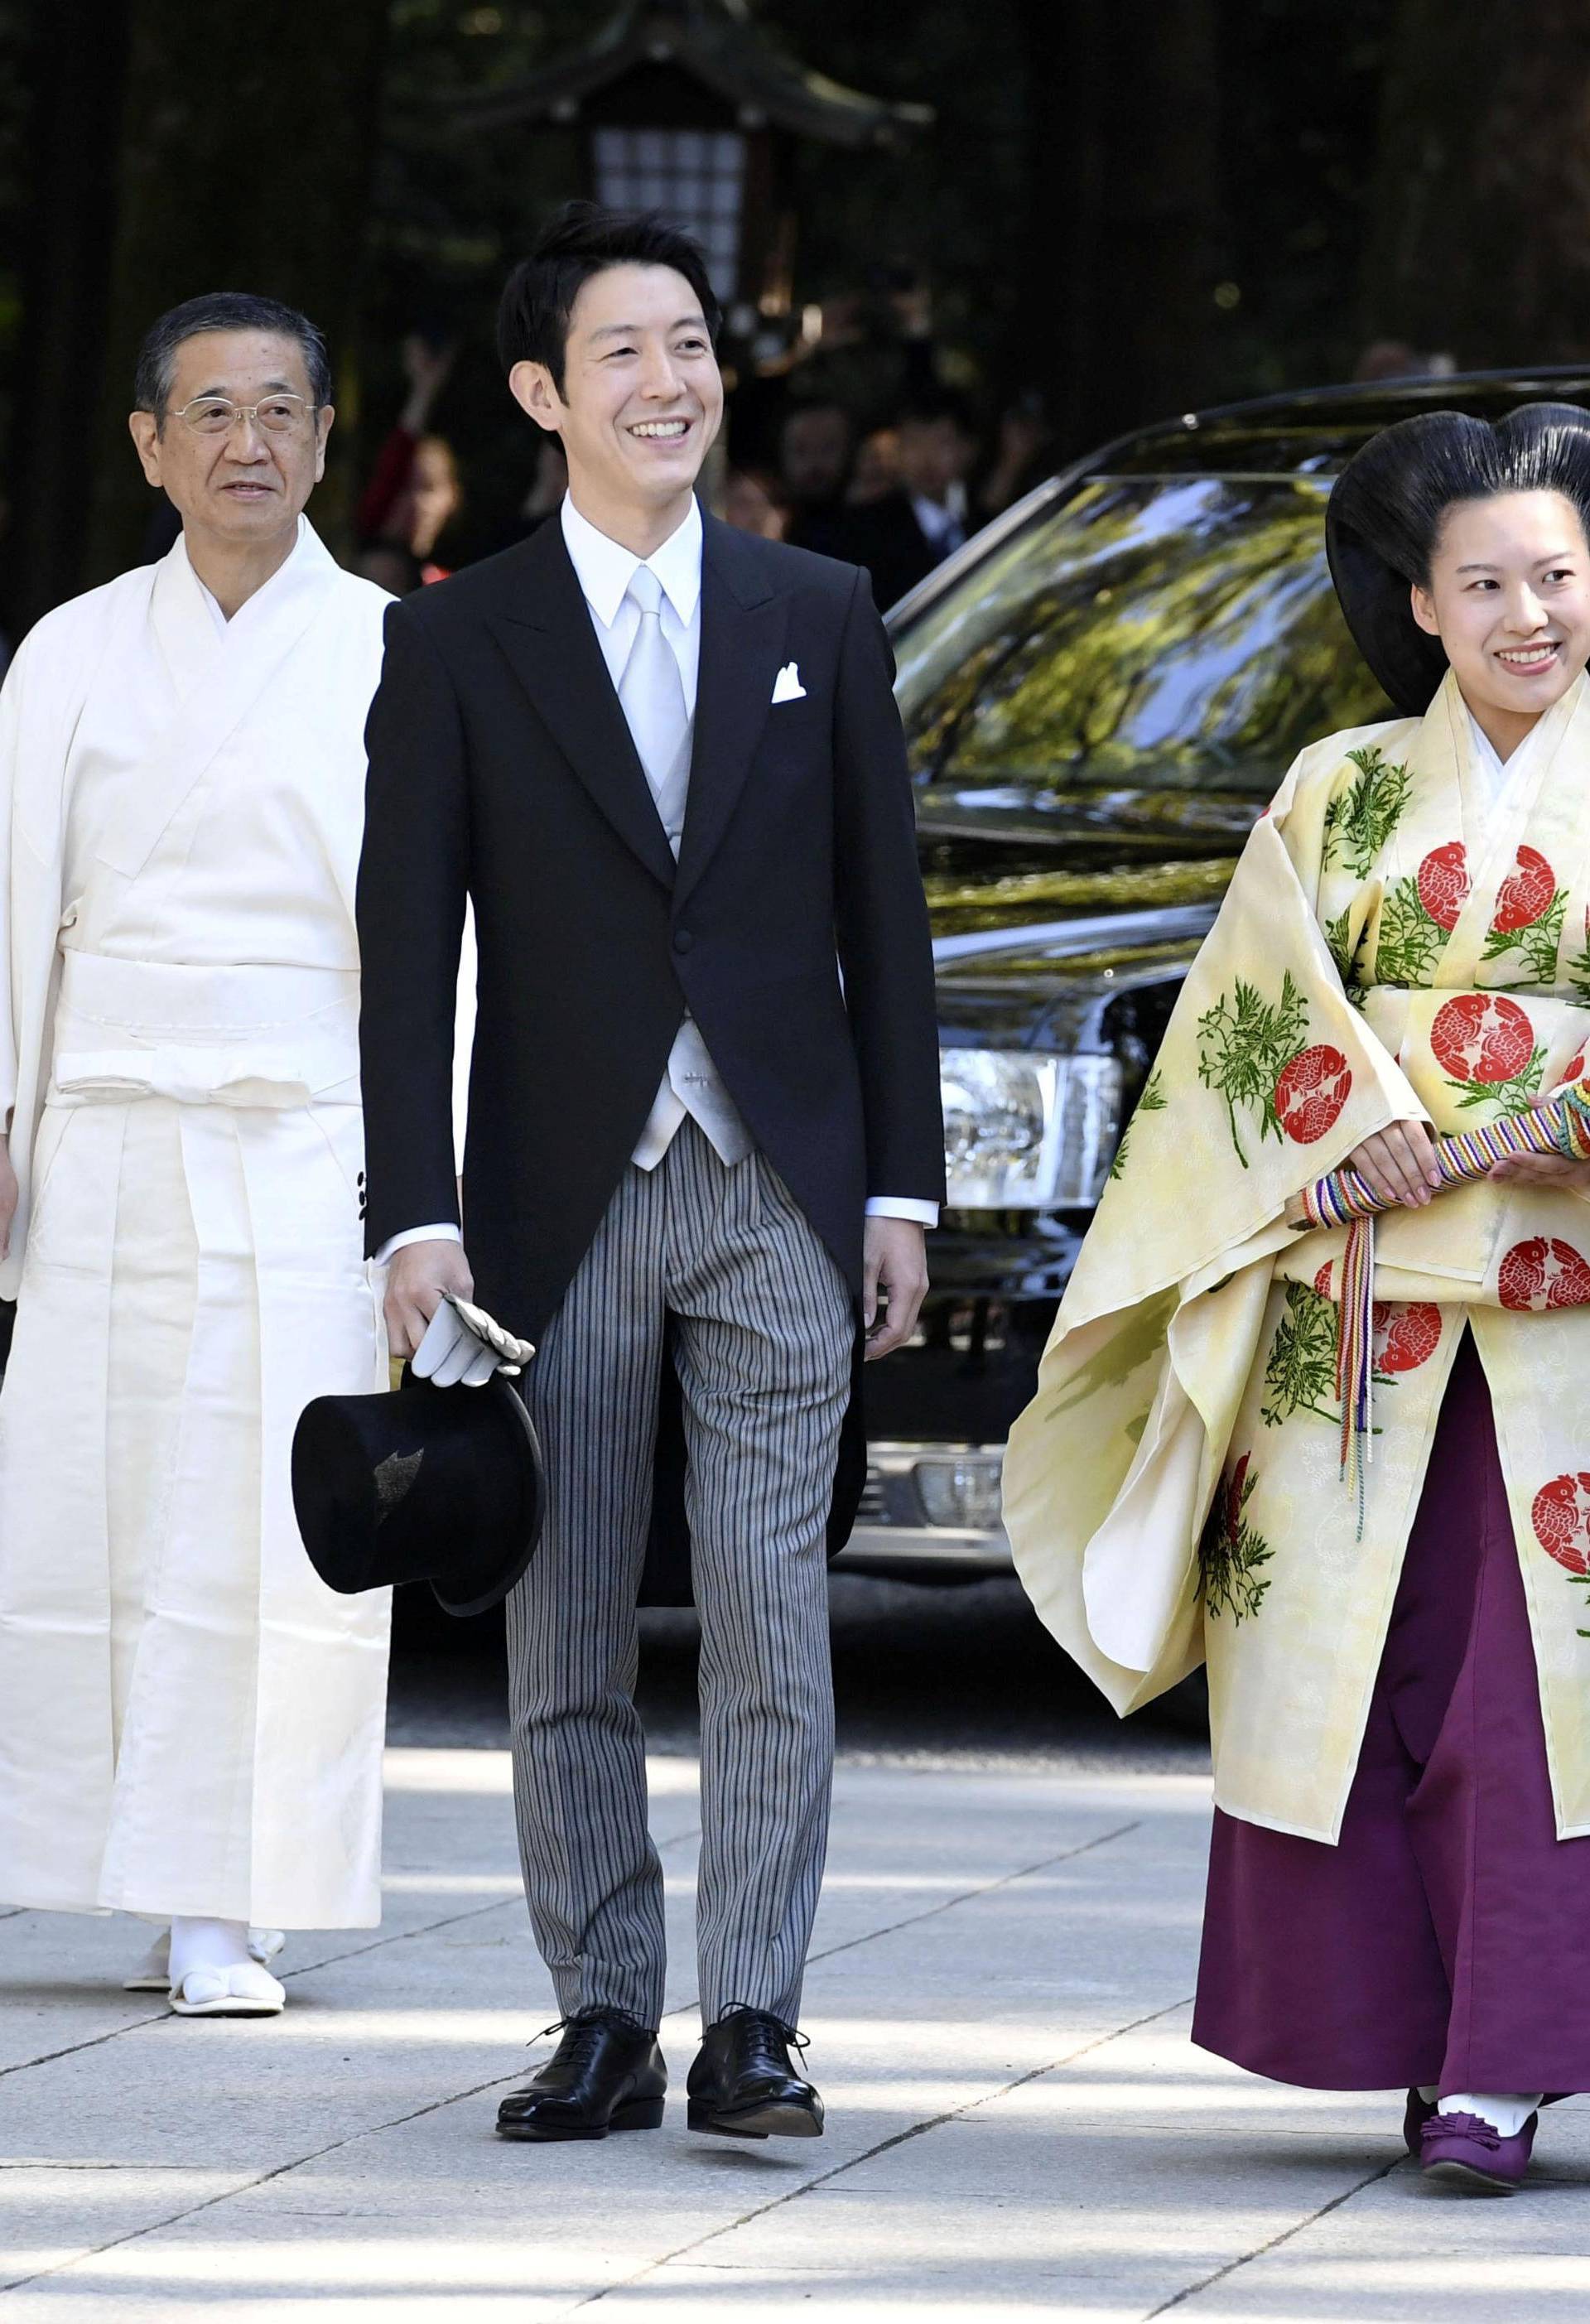 Japanese Princess Ayako and her husband-to-be Kei Moriya arrive at the Meiji Shrine for wedding ceremony in Tokyo